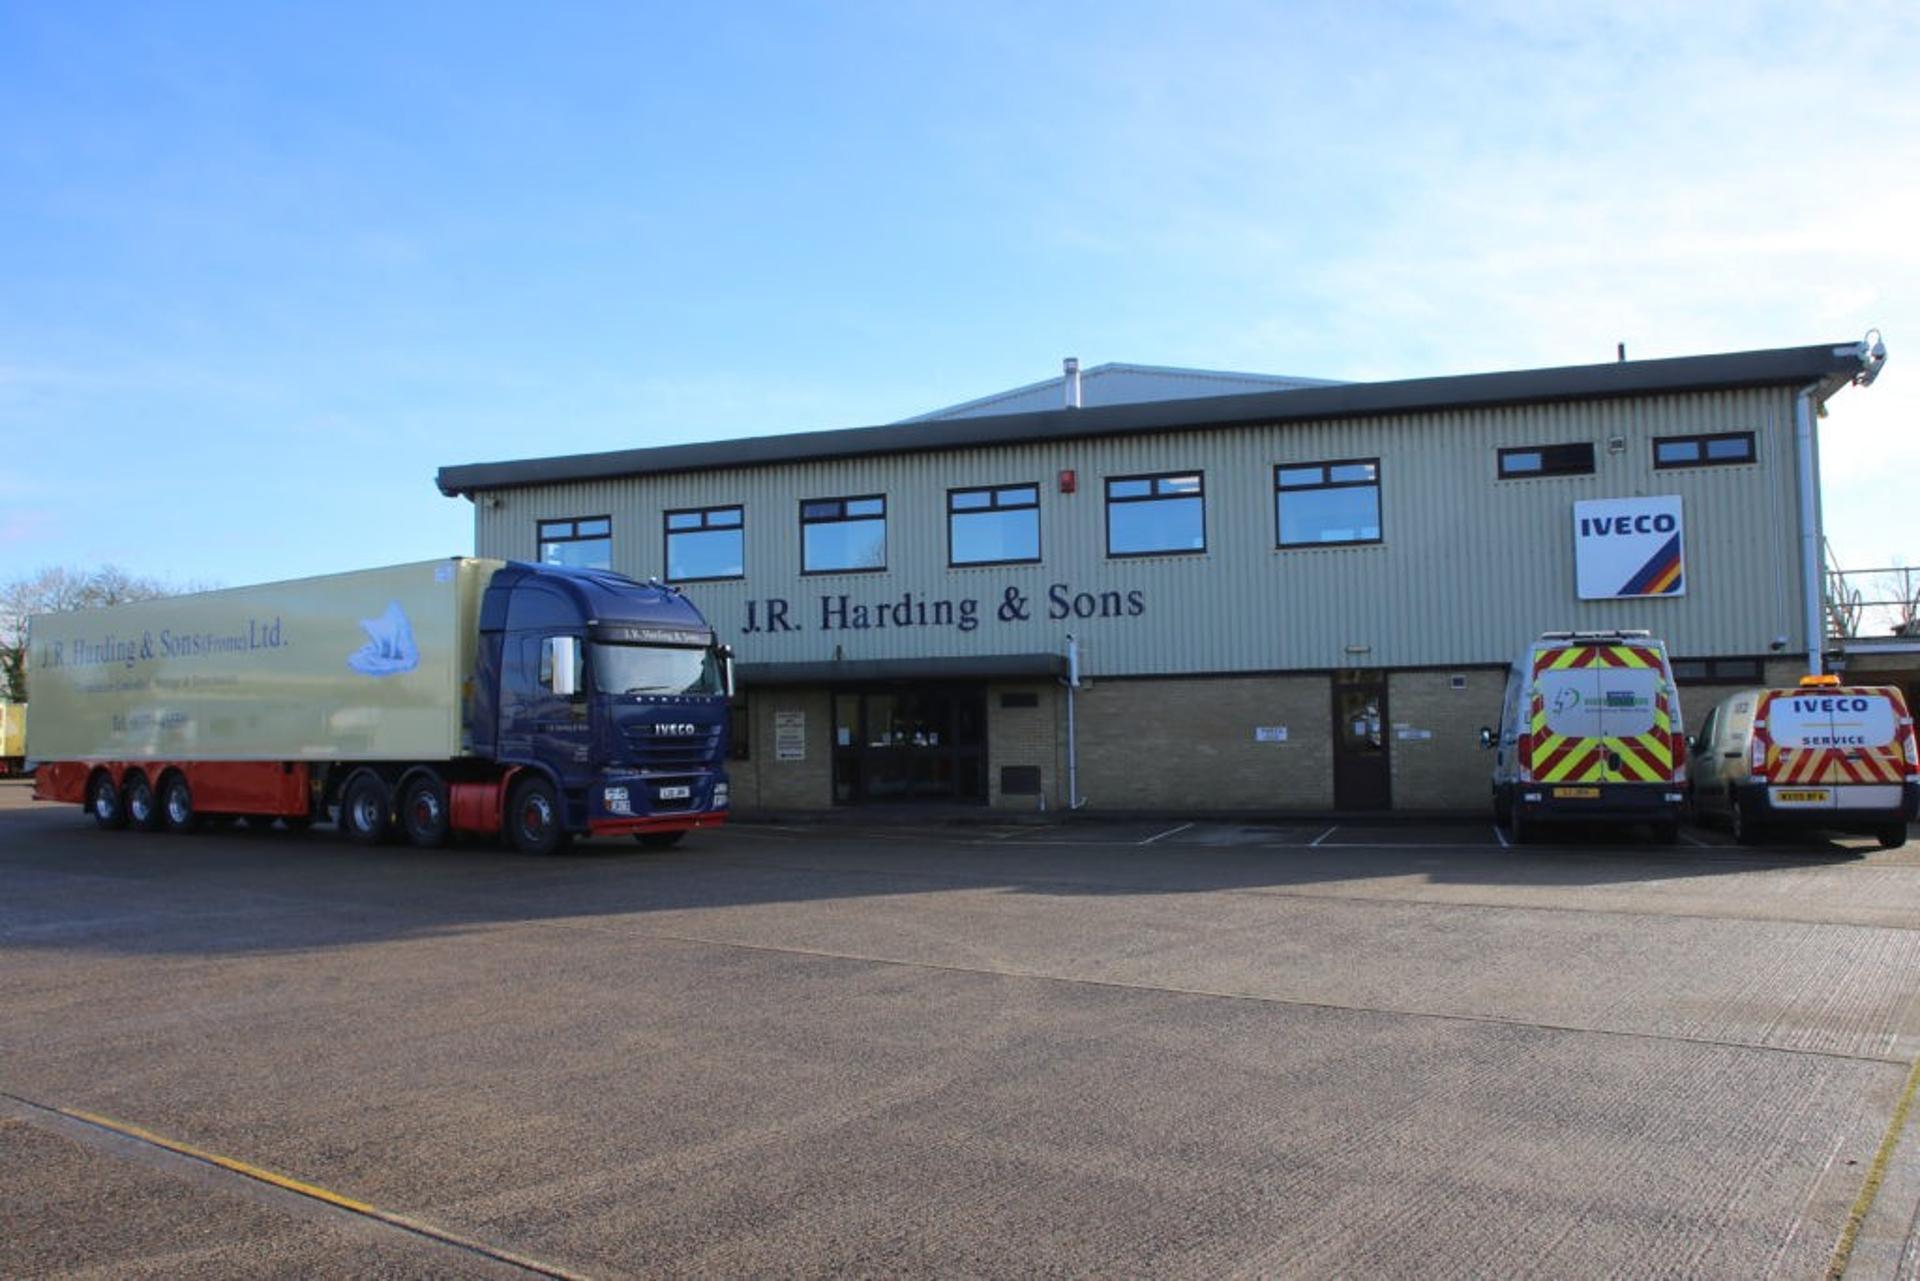 Warehouse and distribution firm acquired by European group